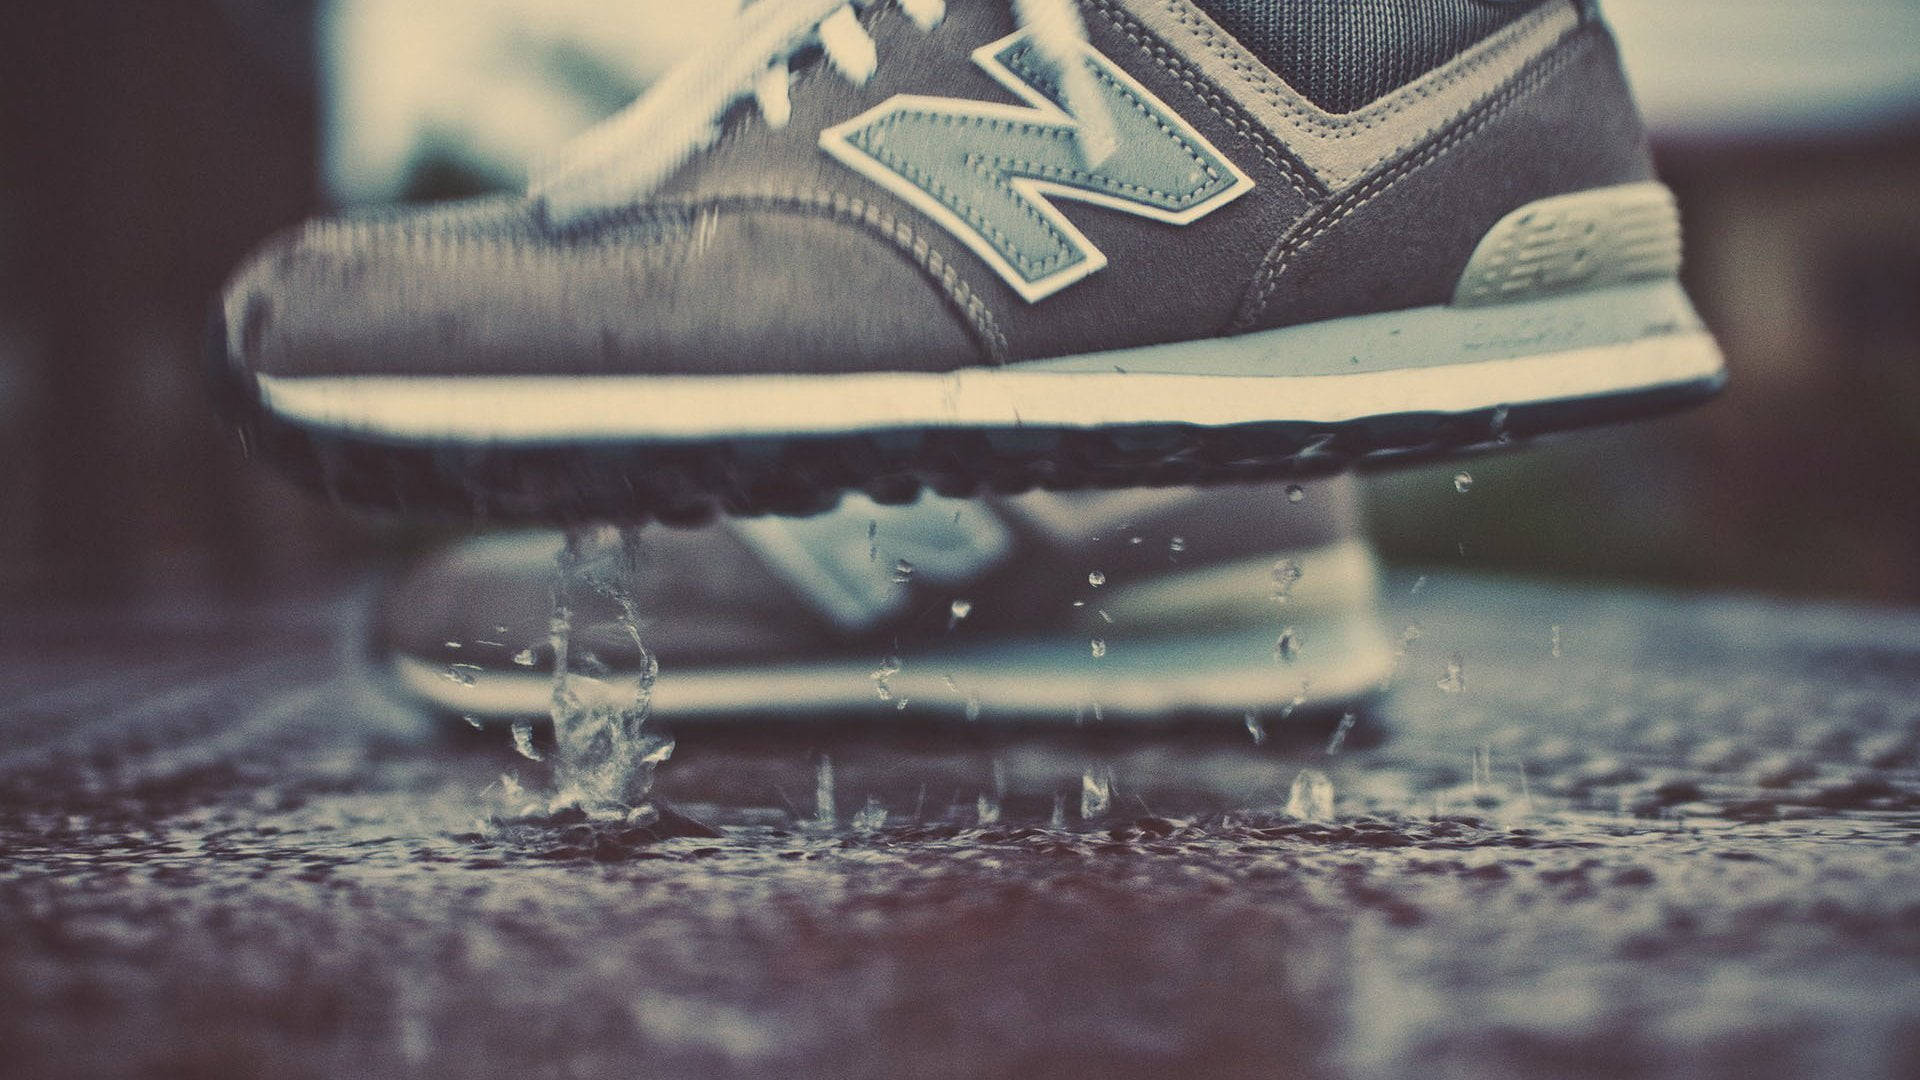 New Balance On Puddle Of Water Background